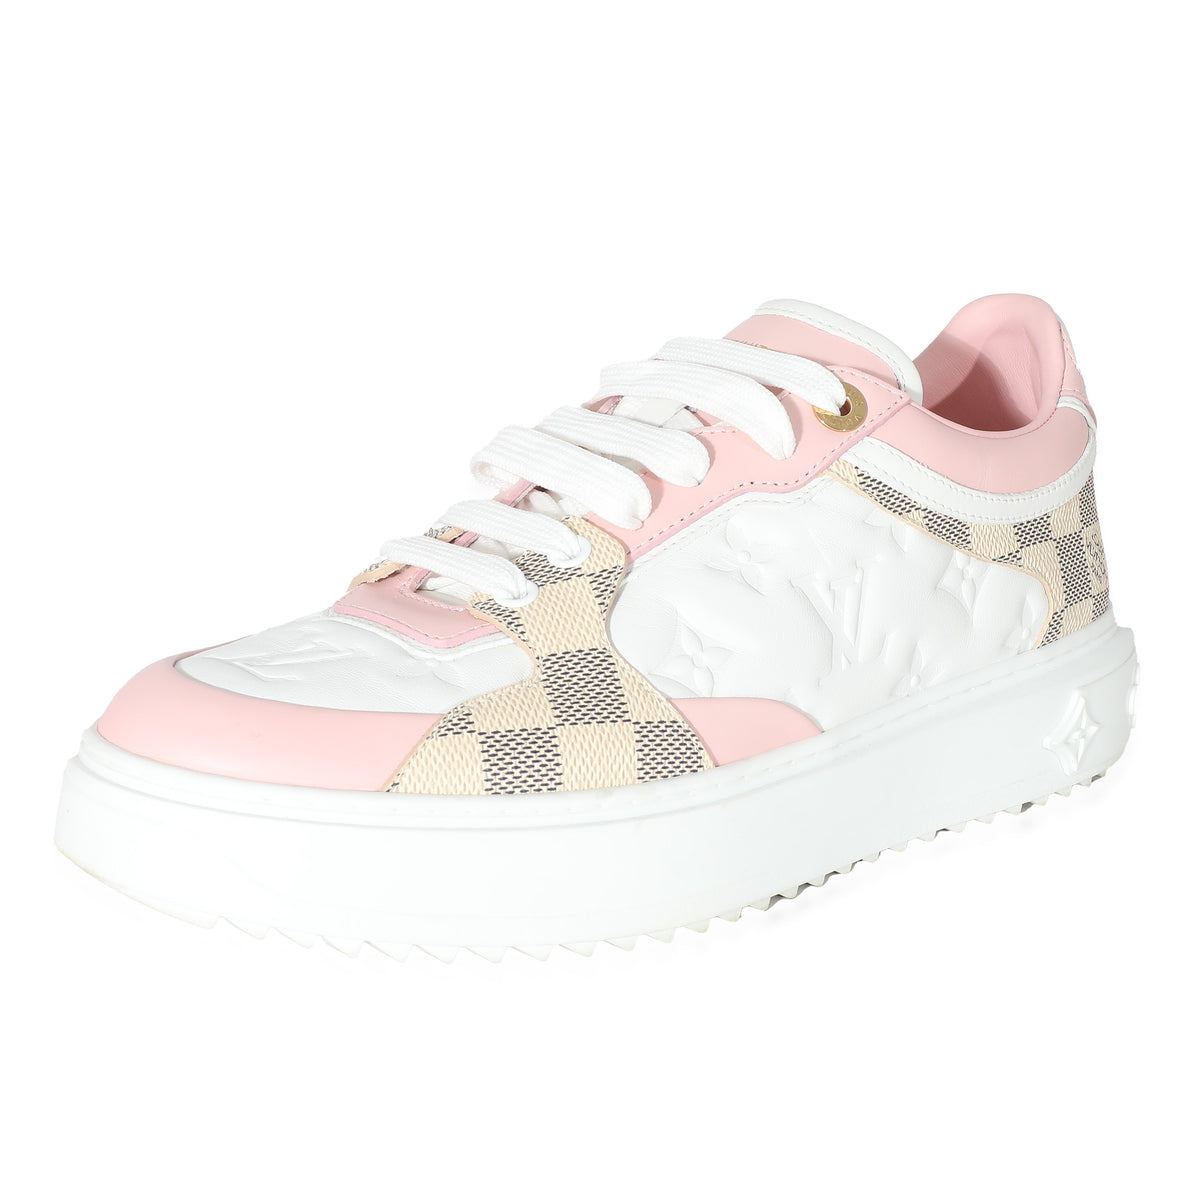 Louis Vuitton Monogram Embossed Damier Time Out Womens Sneakers